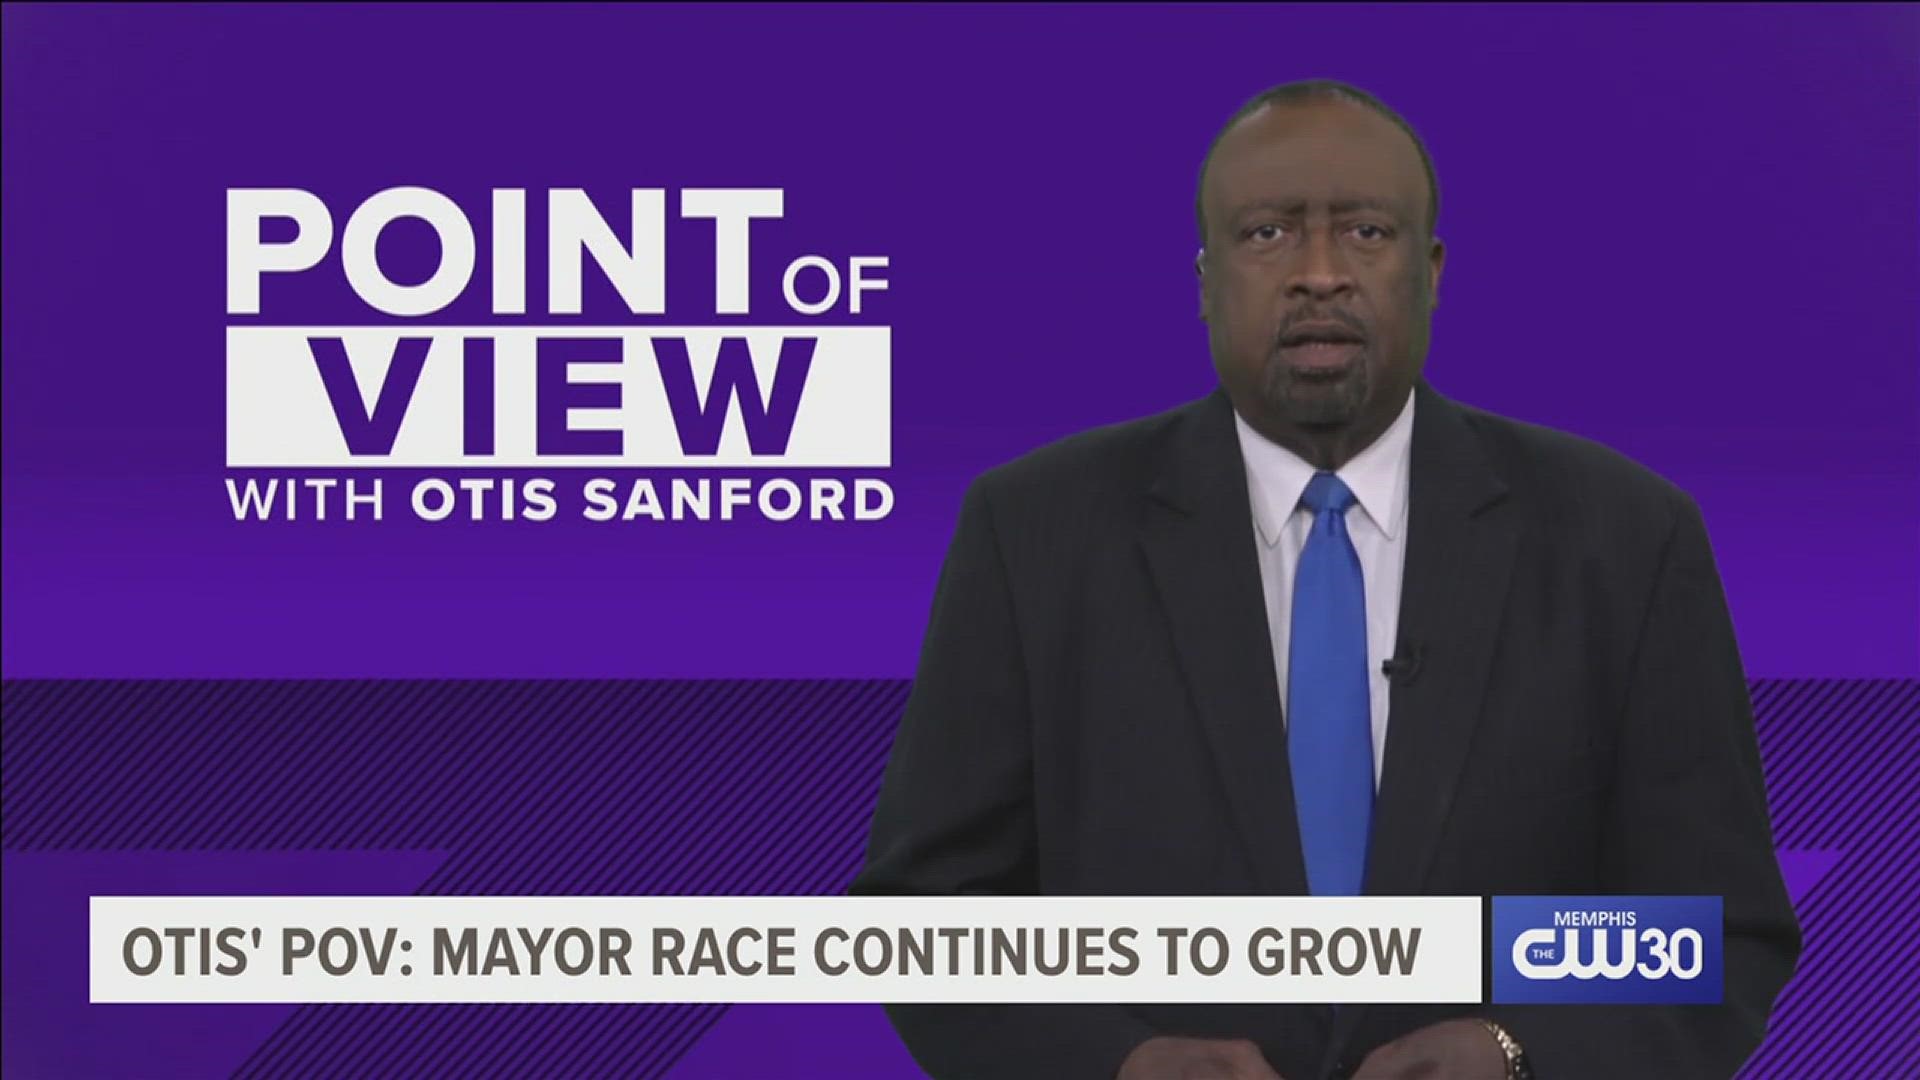 Political analyst Otis Sanford shares his thoughts on how Tyre Nichols' death has affected Memphis and what the city's next leader must have in mind moving forward.